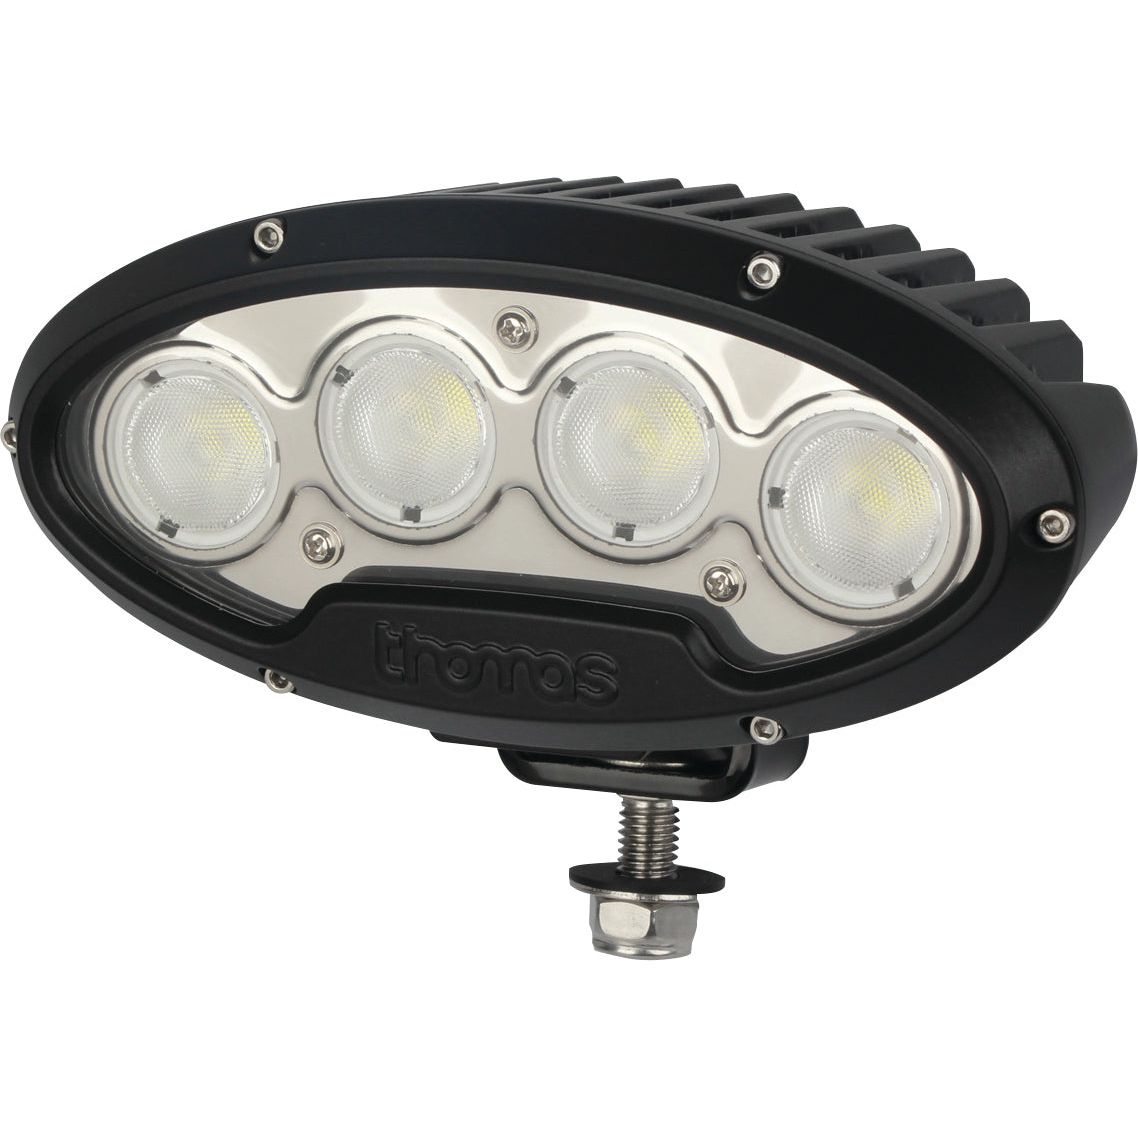 LED Work Light (Cree High Power), Interference: Class 3, 7000 Lumens Raw, 10-60V
 - S.130025 - Farming Parts